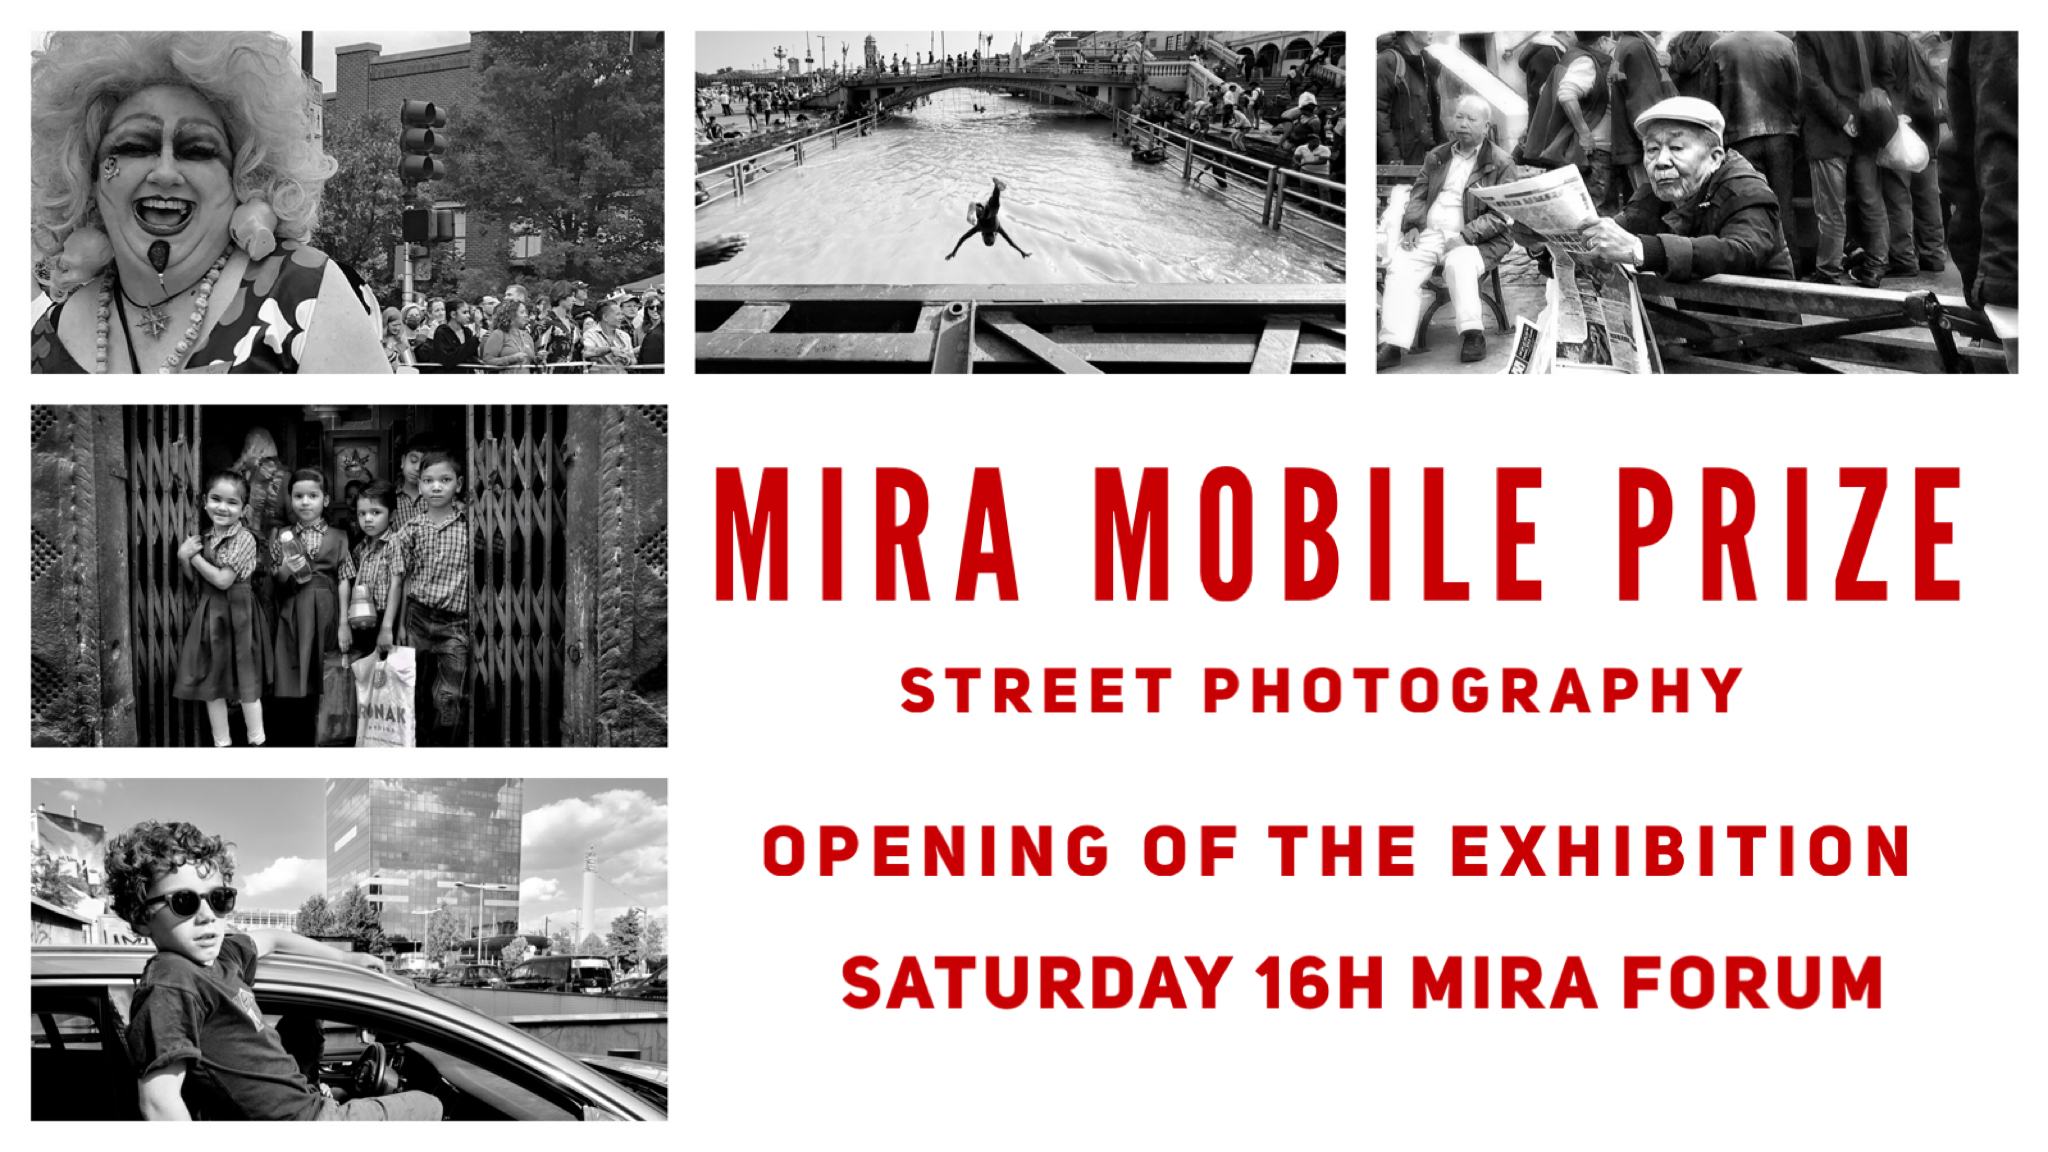 Opening of the exhibition of MMPrize Street Photography B&W